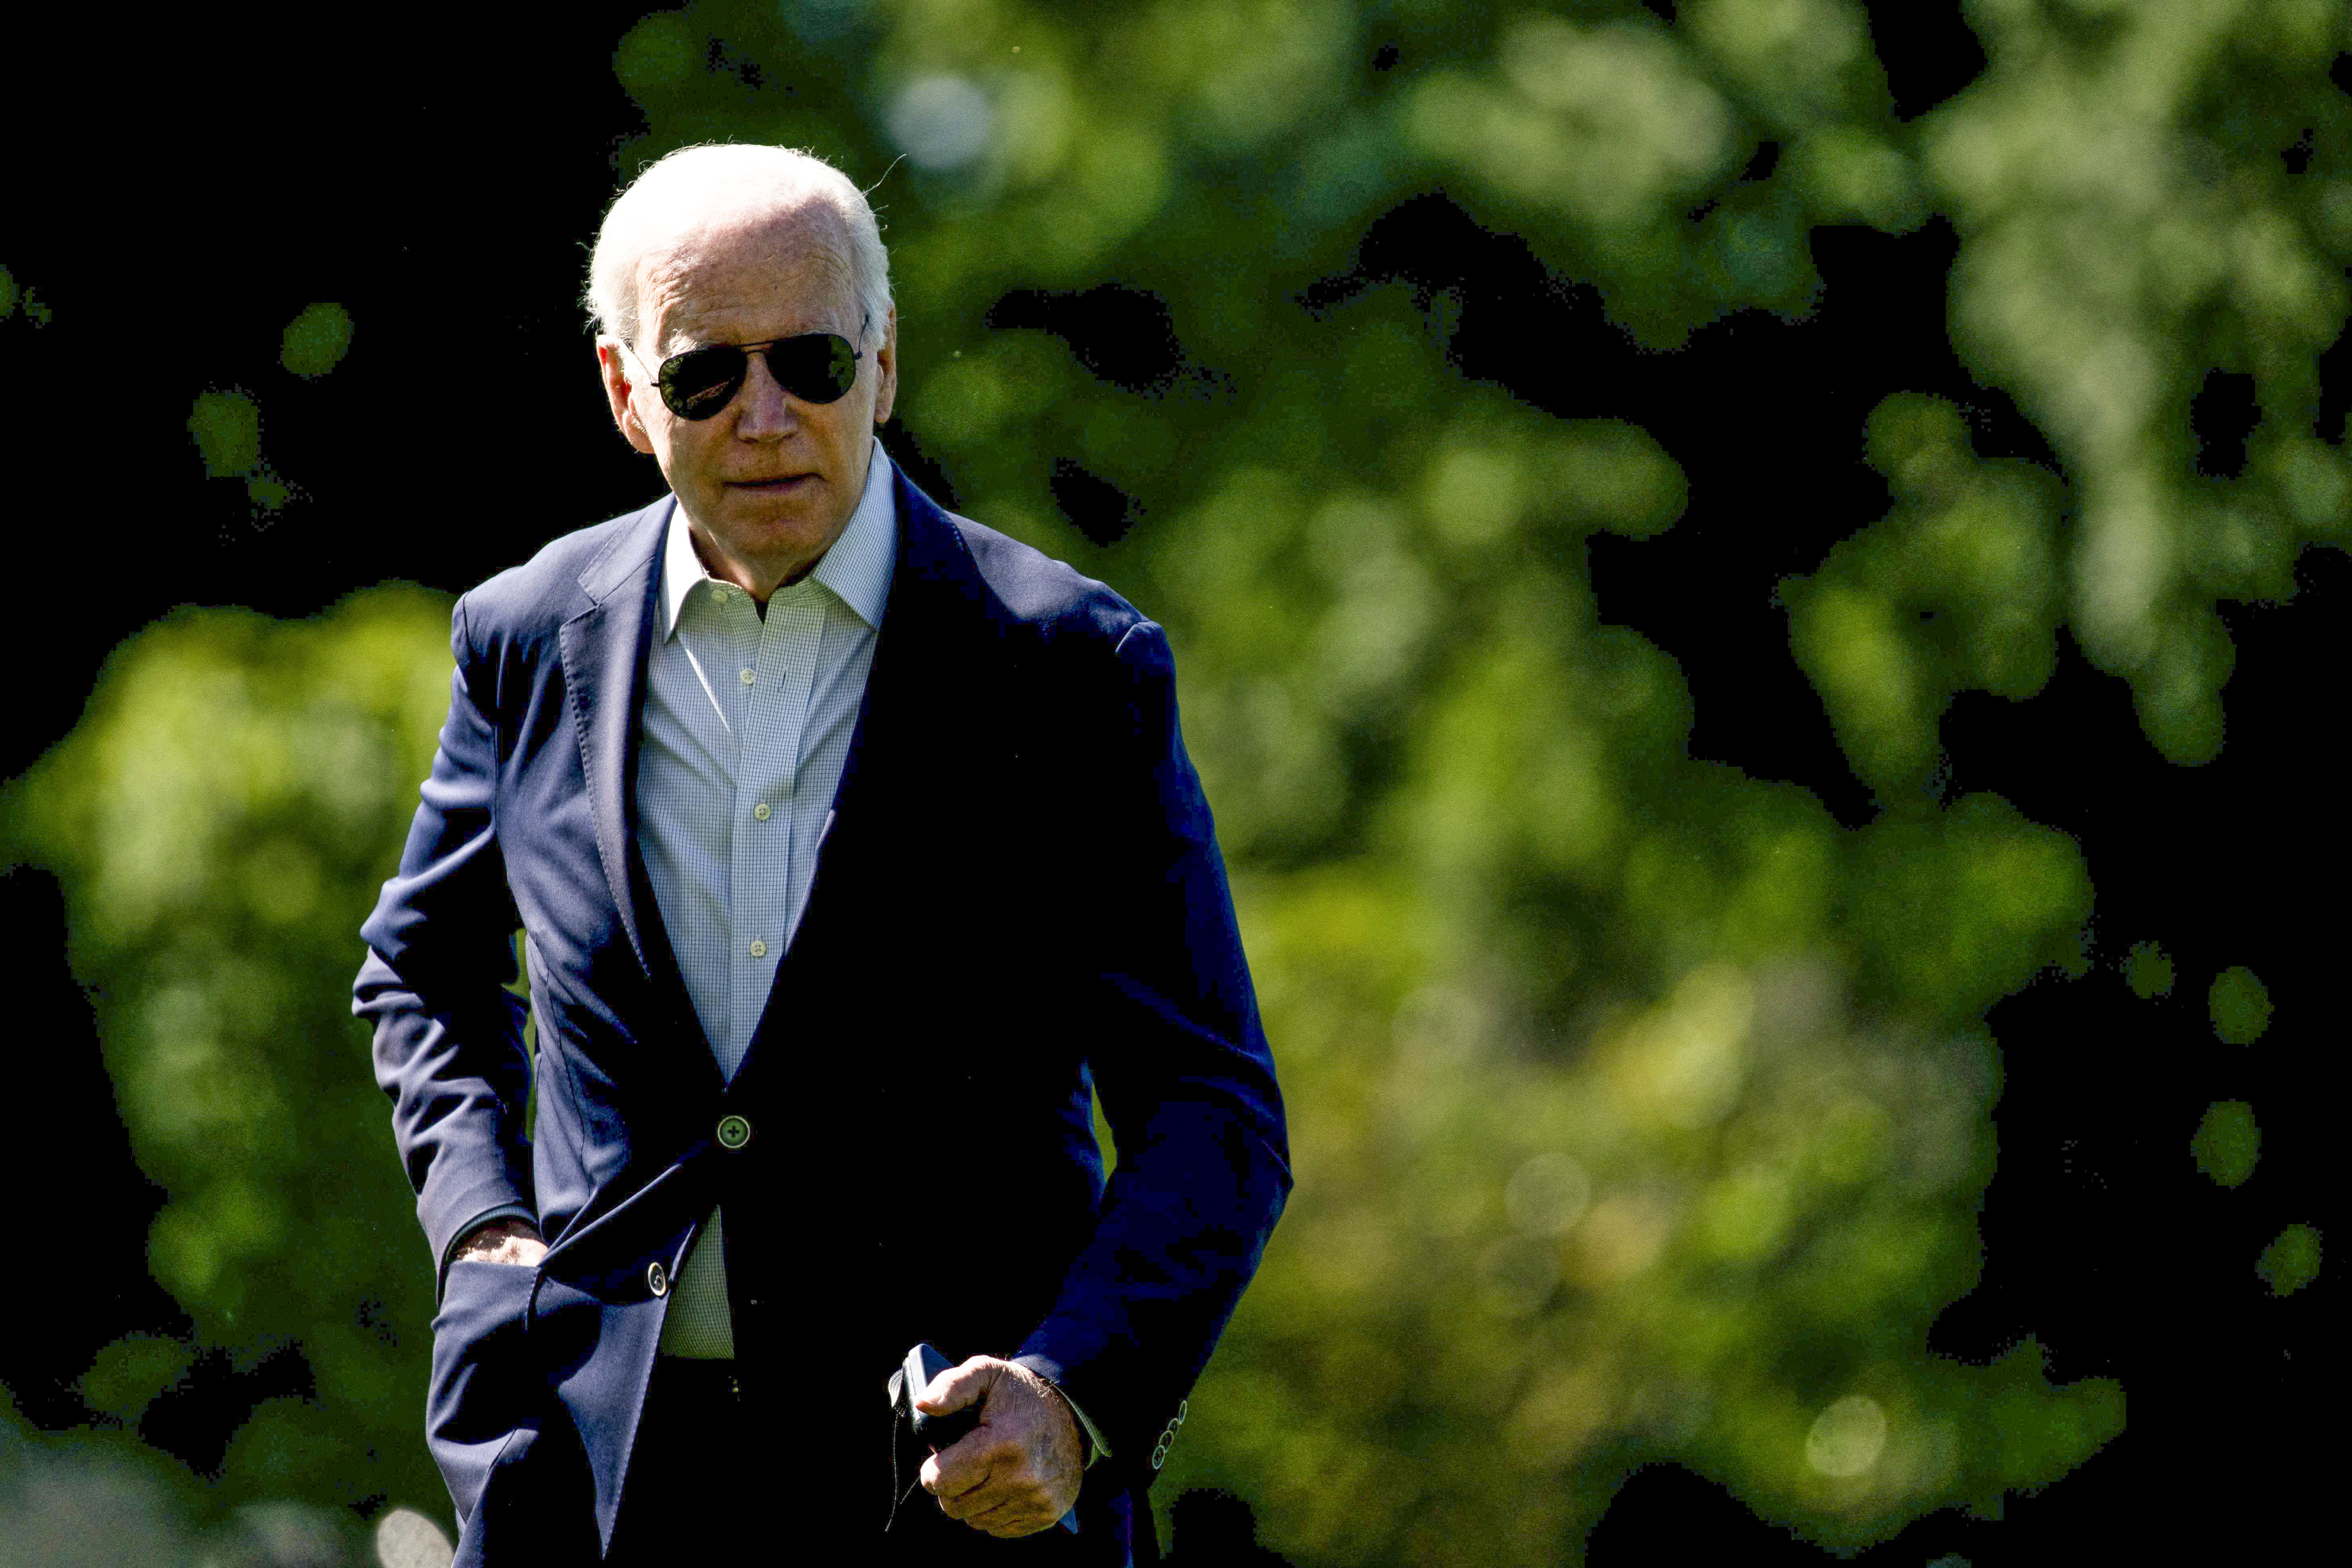 US President Joe Biden will announce the American Partnership for Economic Prosperity and a US$300 million aid package for the region at the Summit for the Americas on Wednesday. Photo: AFP